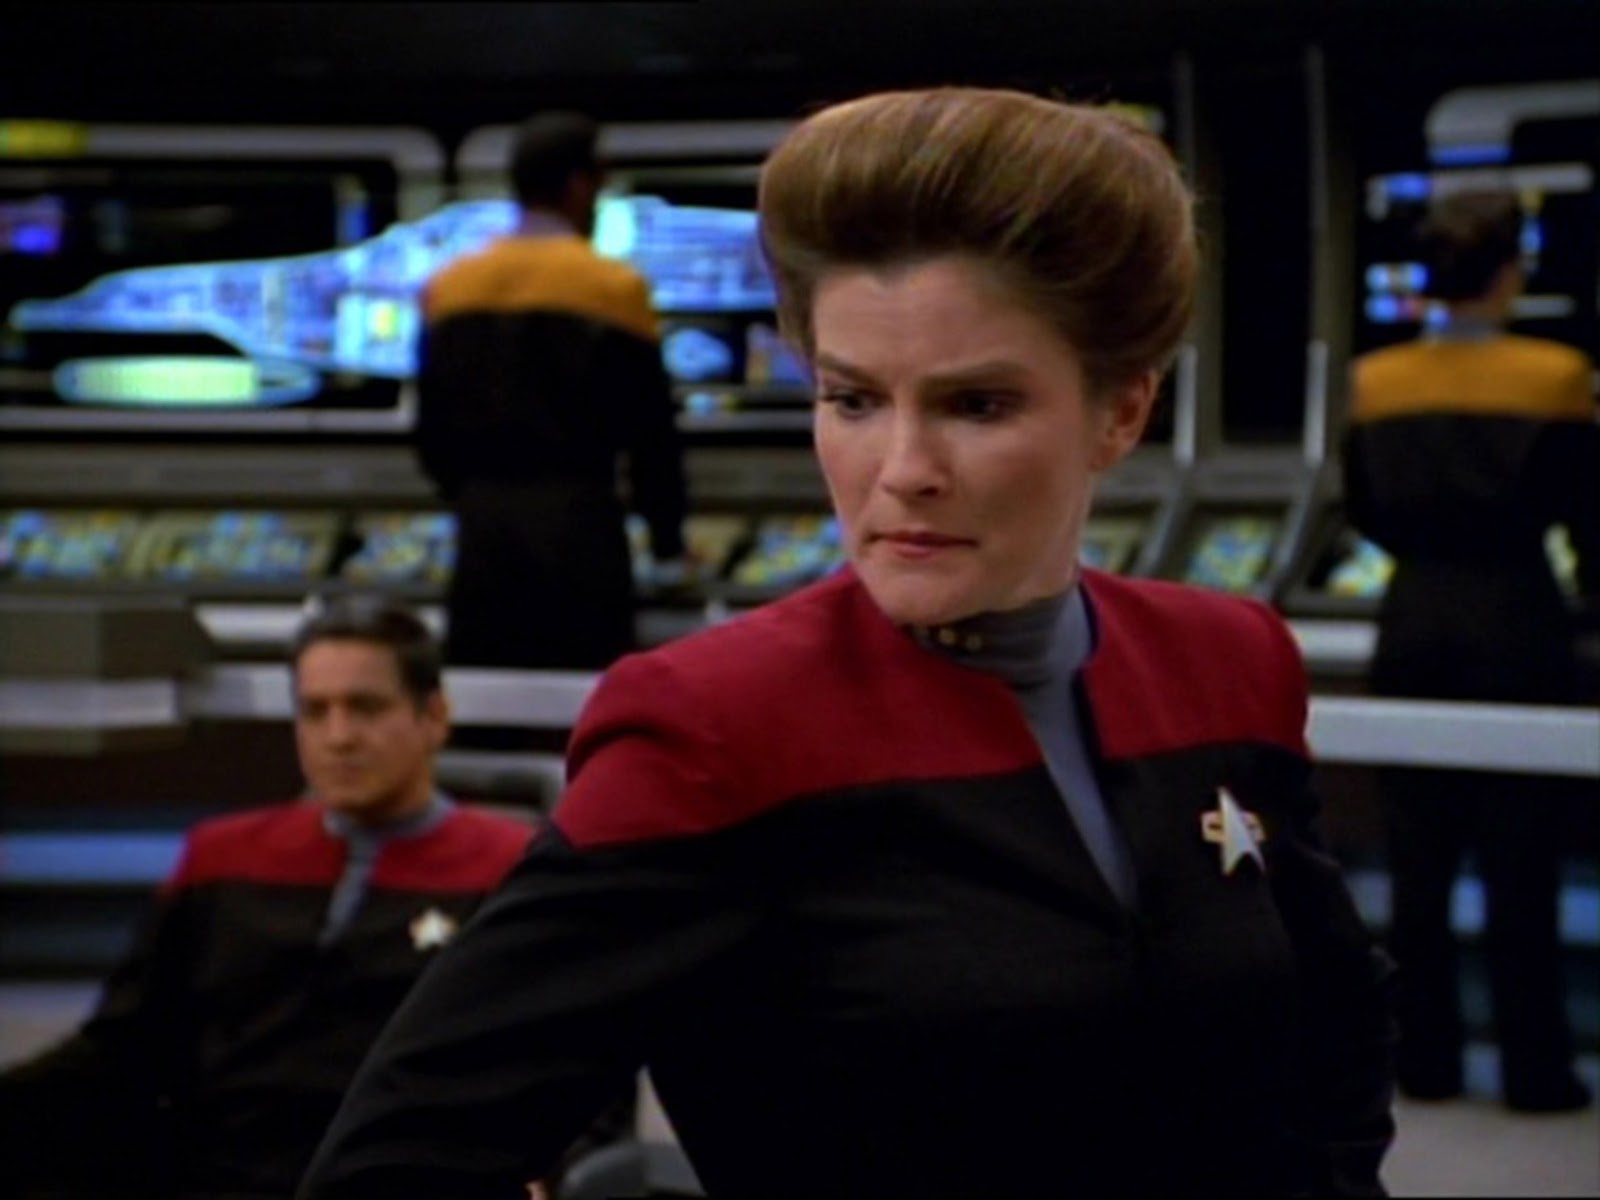 Captain Janeway stares intently while standing on the starship's bridge. She is wearing her black and red uniform complete with the Starfleet insignia communication badge. 